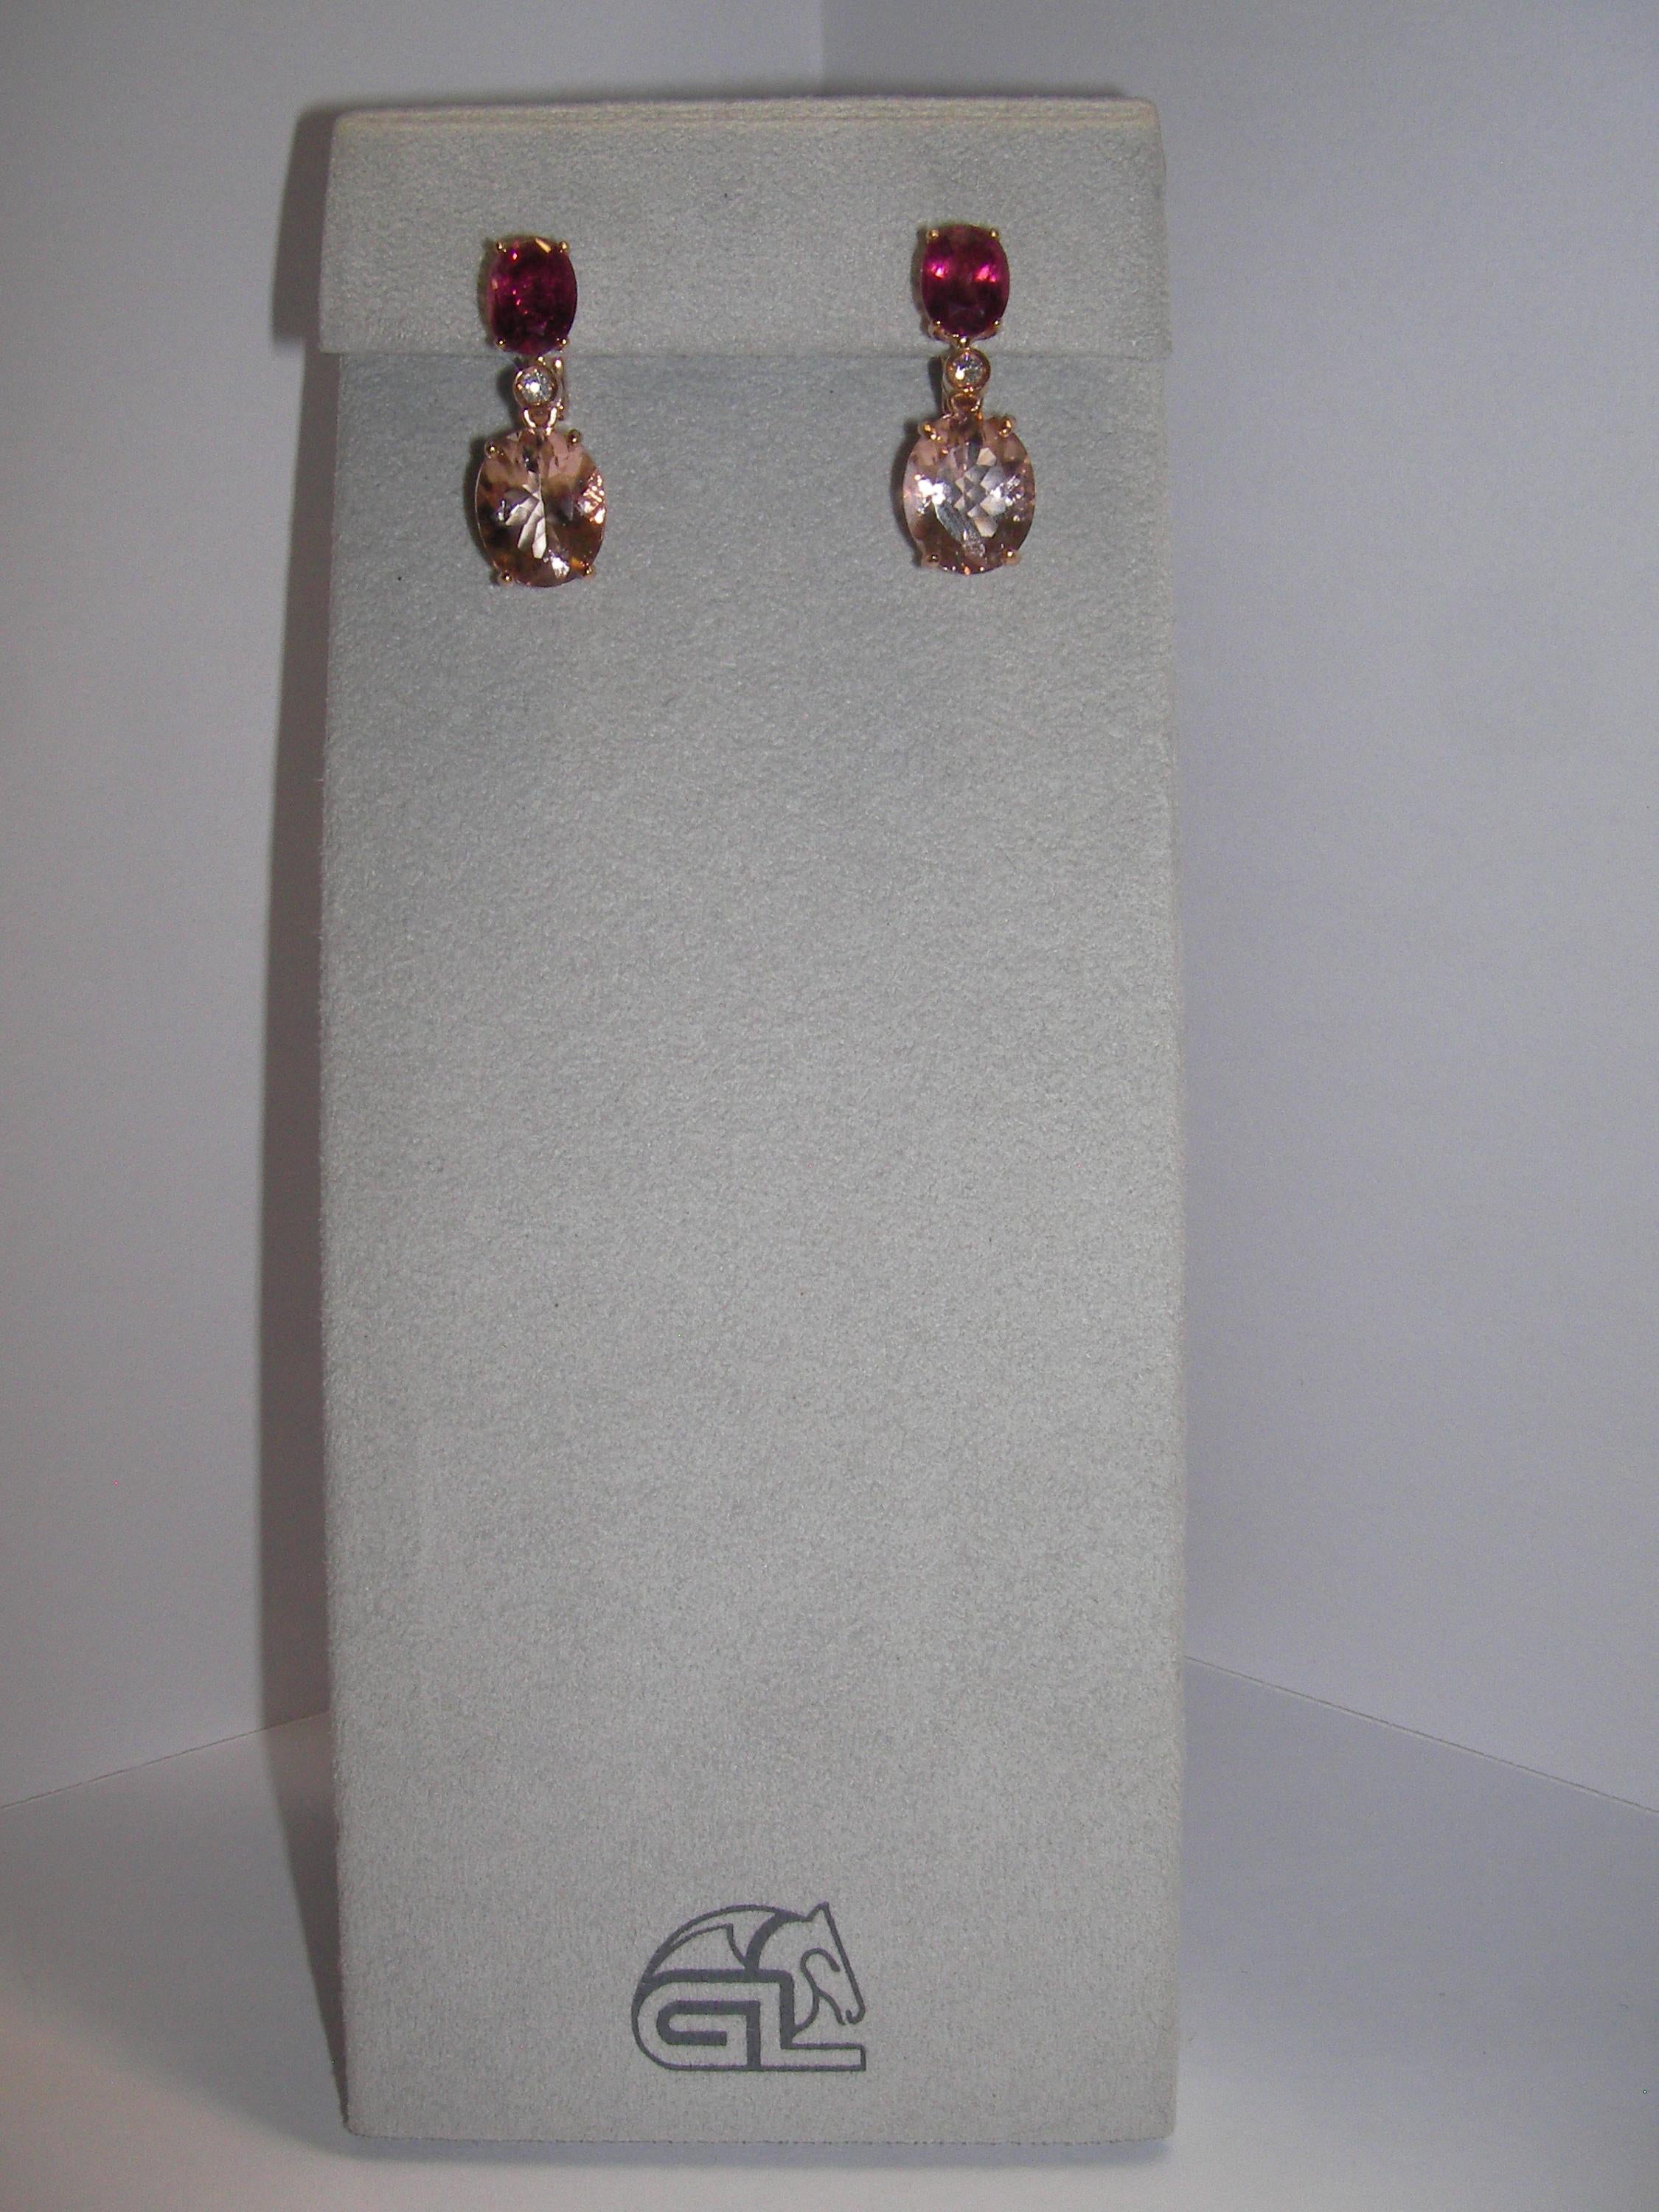 Classy set of earrings featuring a tourmaline base followed by a morganite stone. Both main stones are in oval cut and separated by a single diamond each. 

2 Diamonds 0.07 Carat 
2 Tourmaline 2.96 Carat 
2 Morganite 6.28 Carat